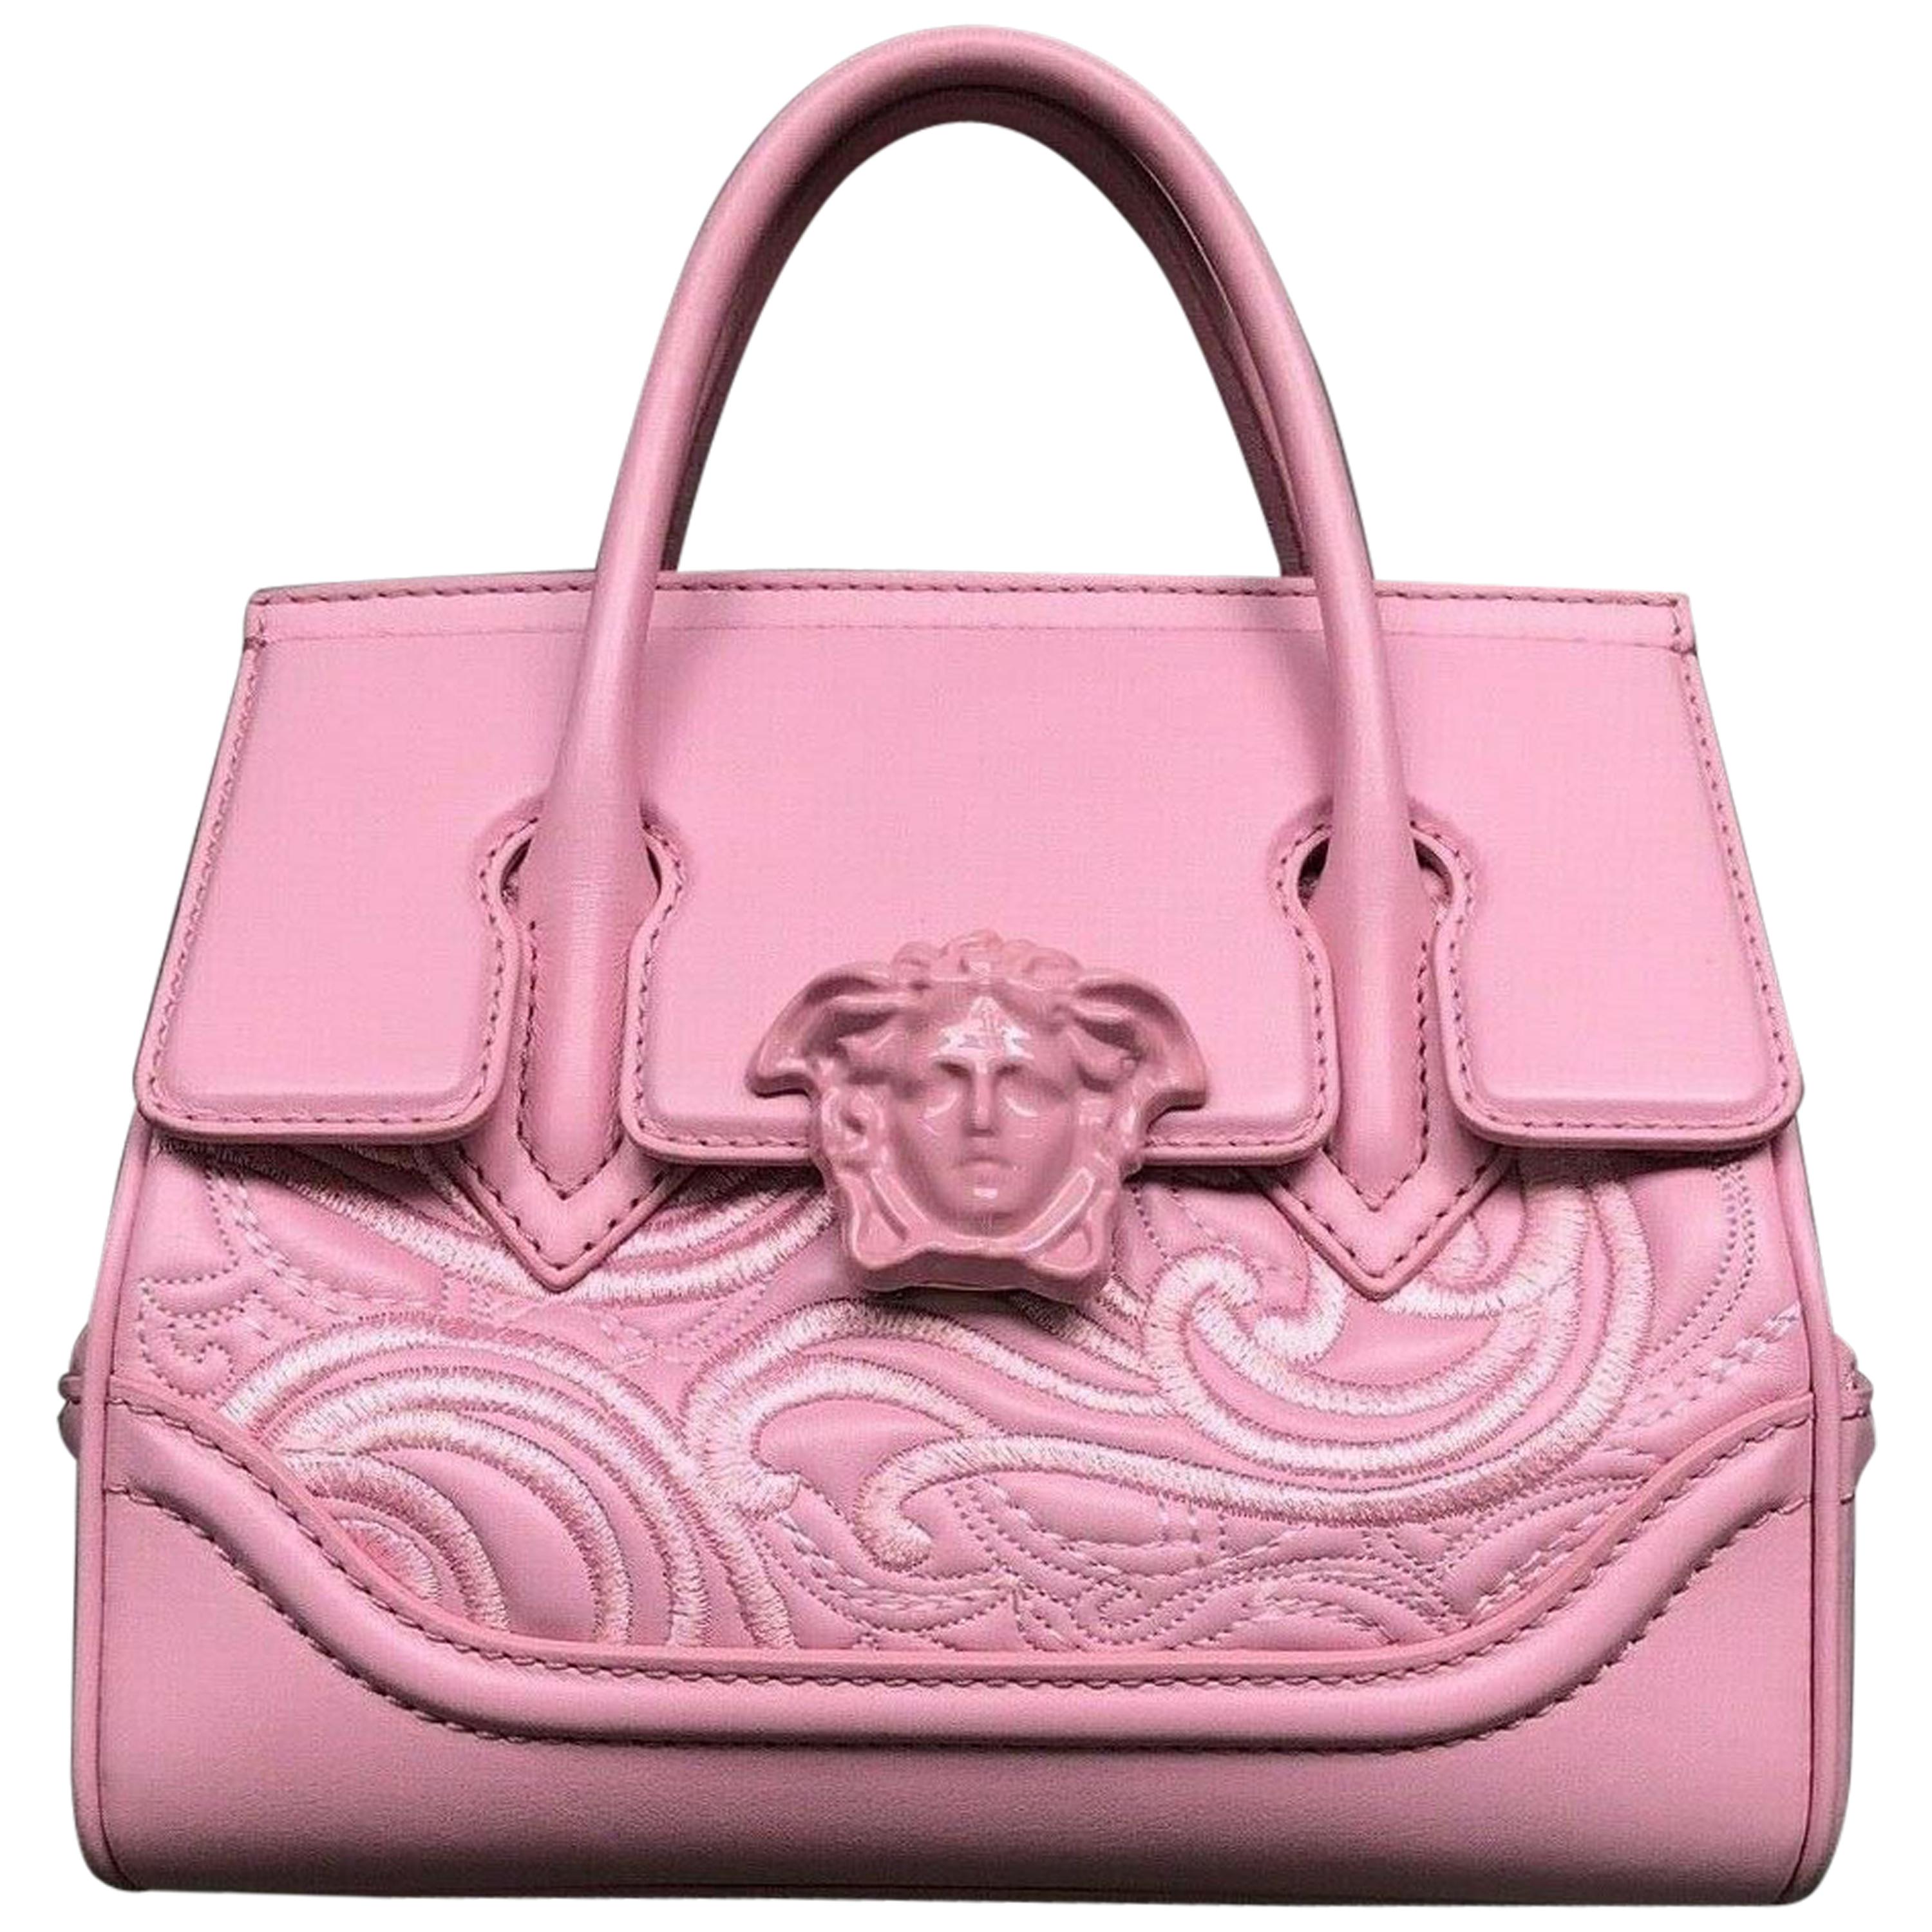 New VERSACE Palazzo Small Empire pink leather embroidery Medusa shoulder bag